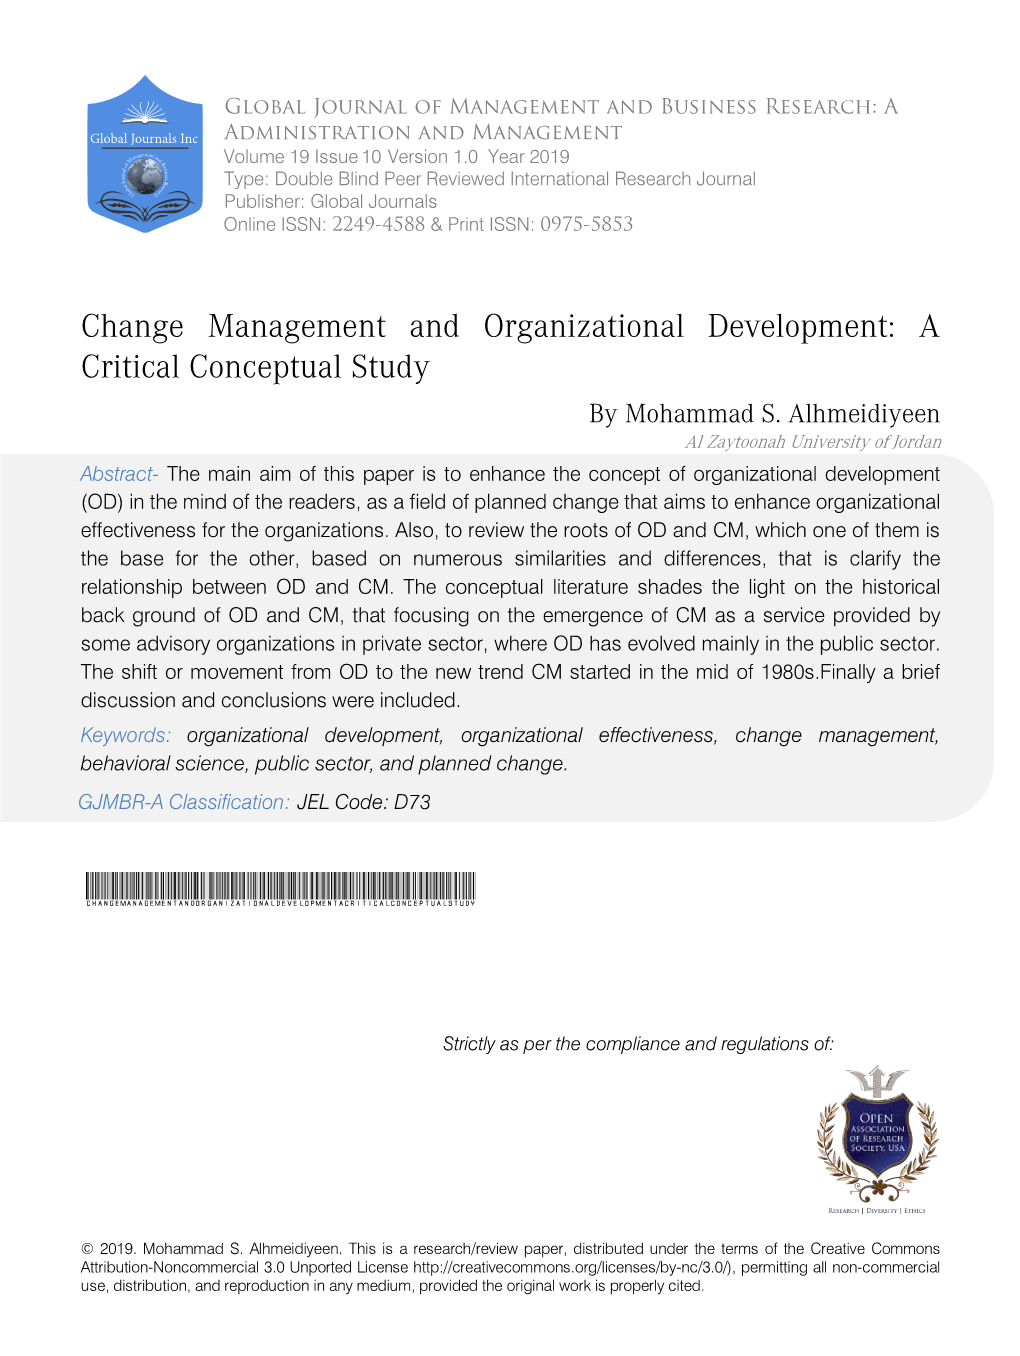 Change Management and Organizational Development: a Critical Conceptual Study by Mohammad S